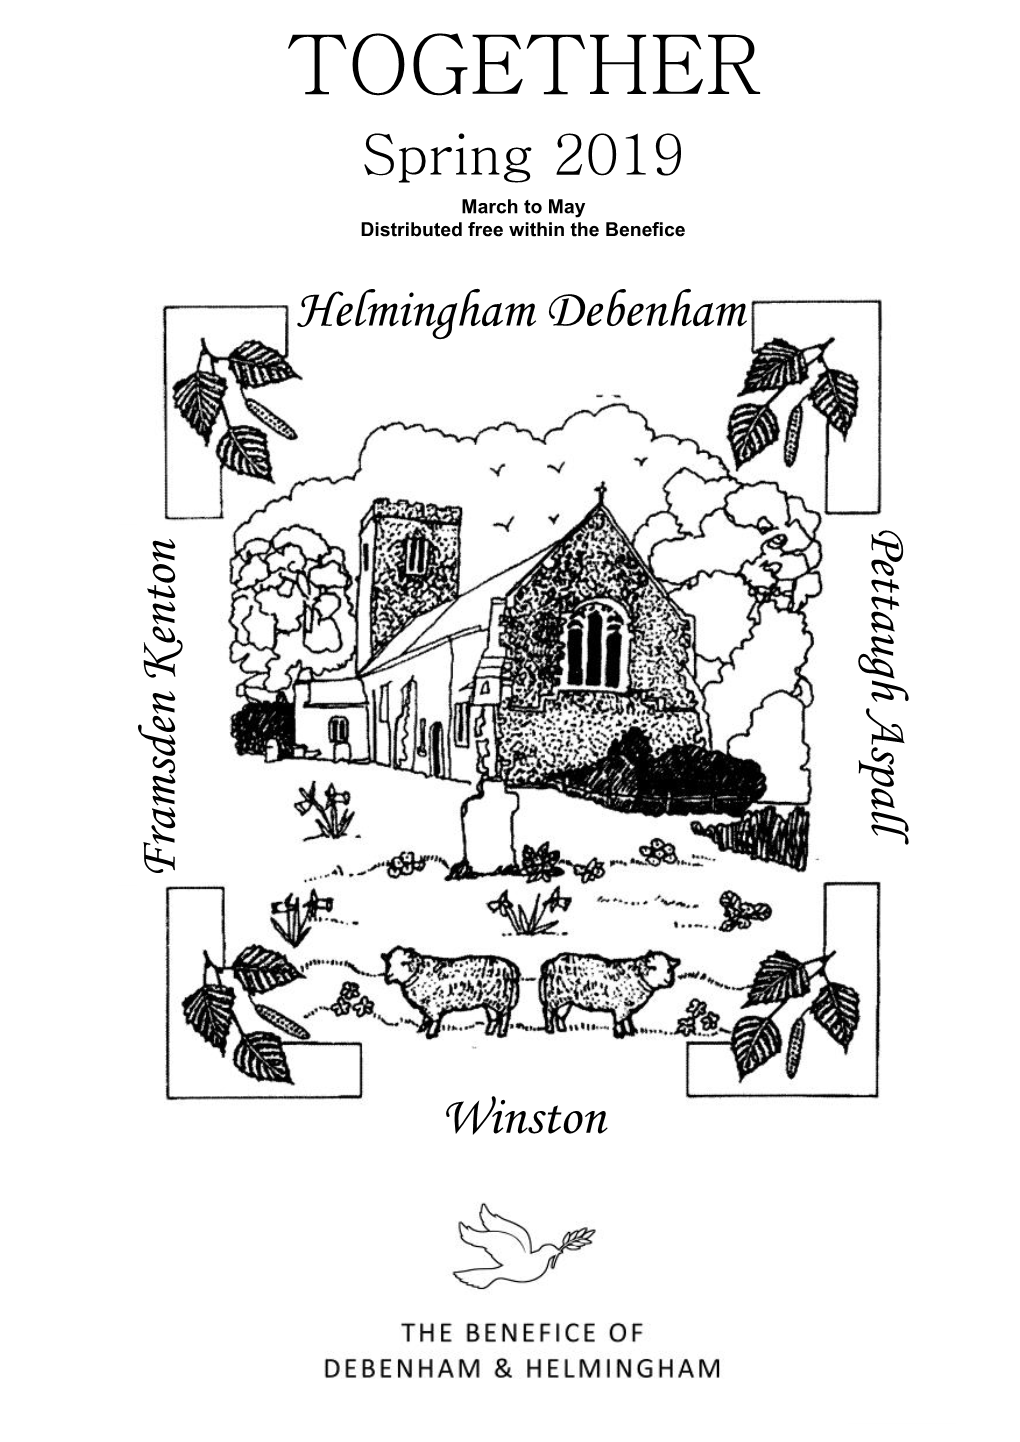 TOGETHER Spring 2019 March to May Distributed Free Within the Benefice Helmingham Debenham